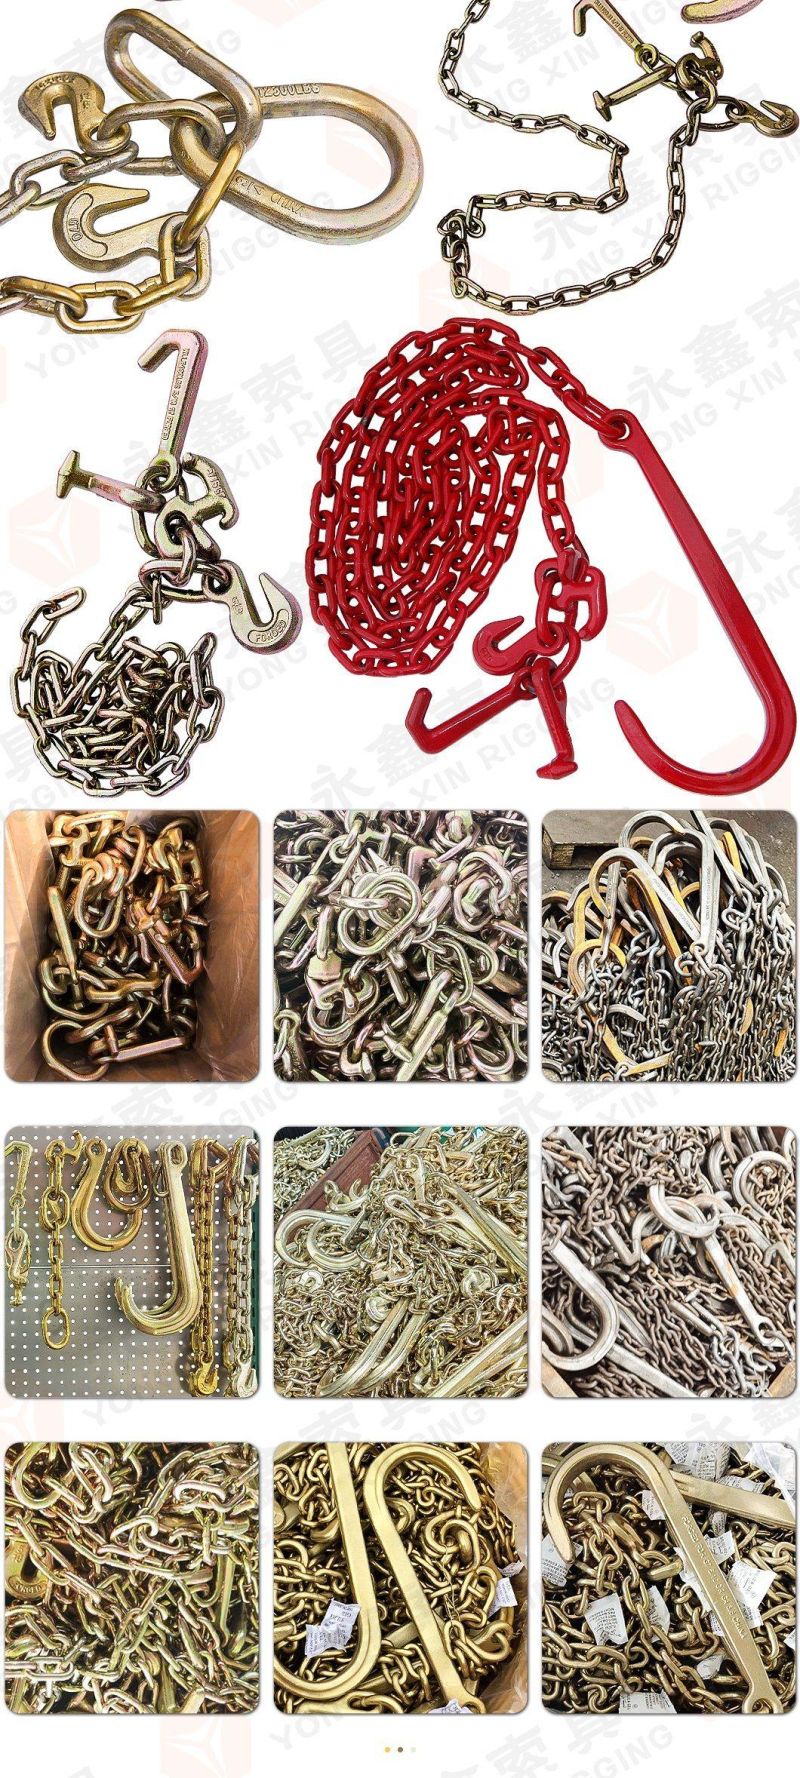 High Quality J Hook and Grab Hook Chain for Truck